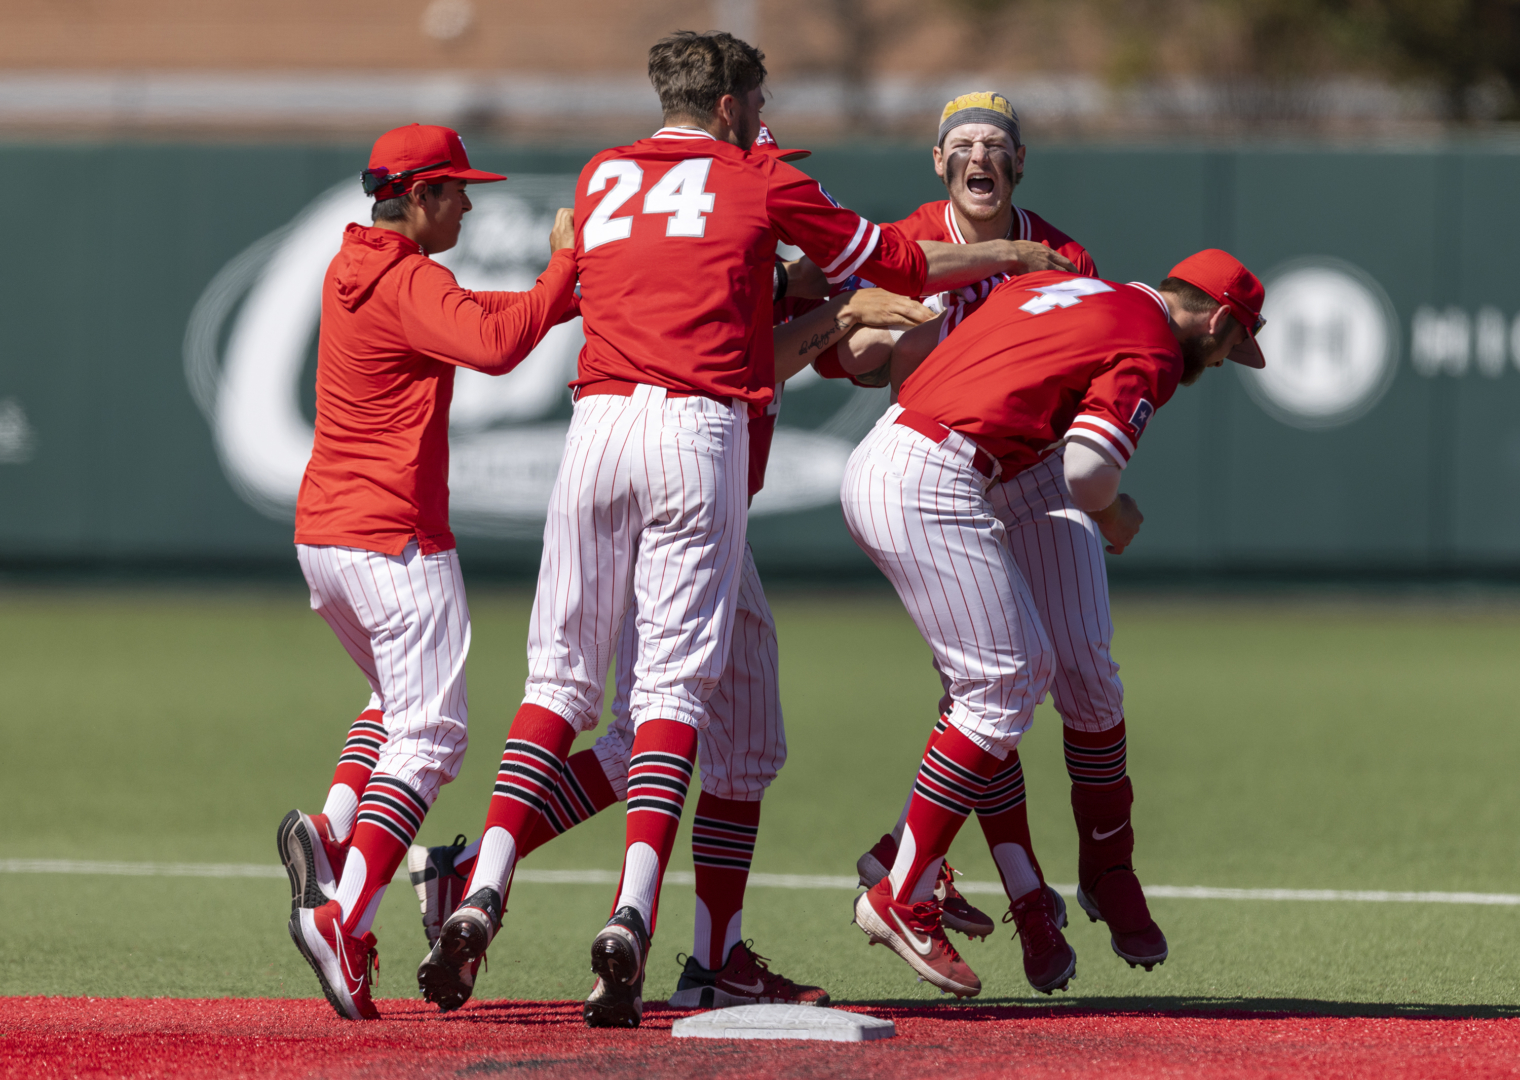 Ian McMillan is mobbed by his teammates after his walk-off double on Sunday afternoon to give UH baseball a series victory over Wichita State. | Courtesy of Tom Shea/UH athletics